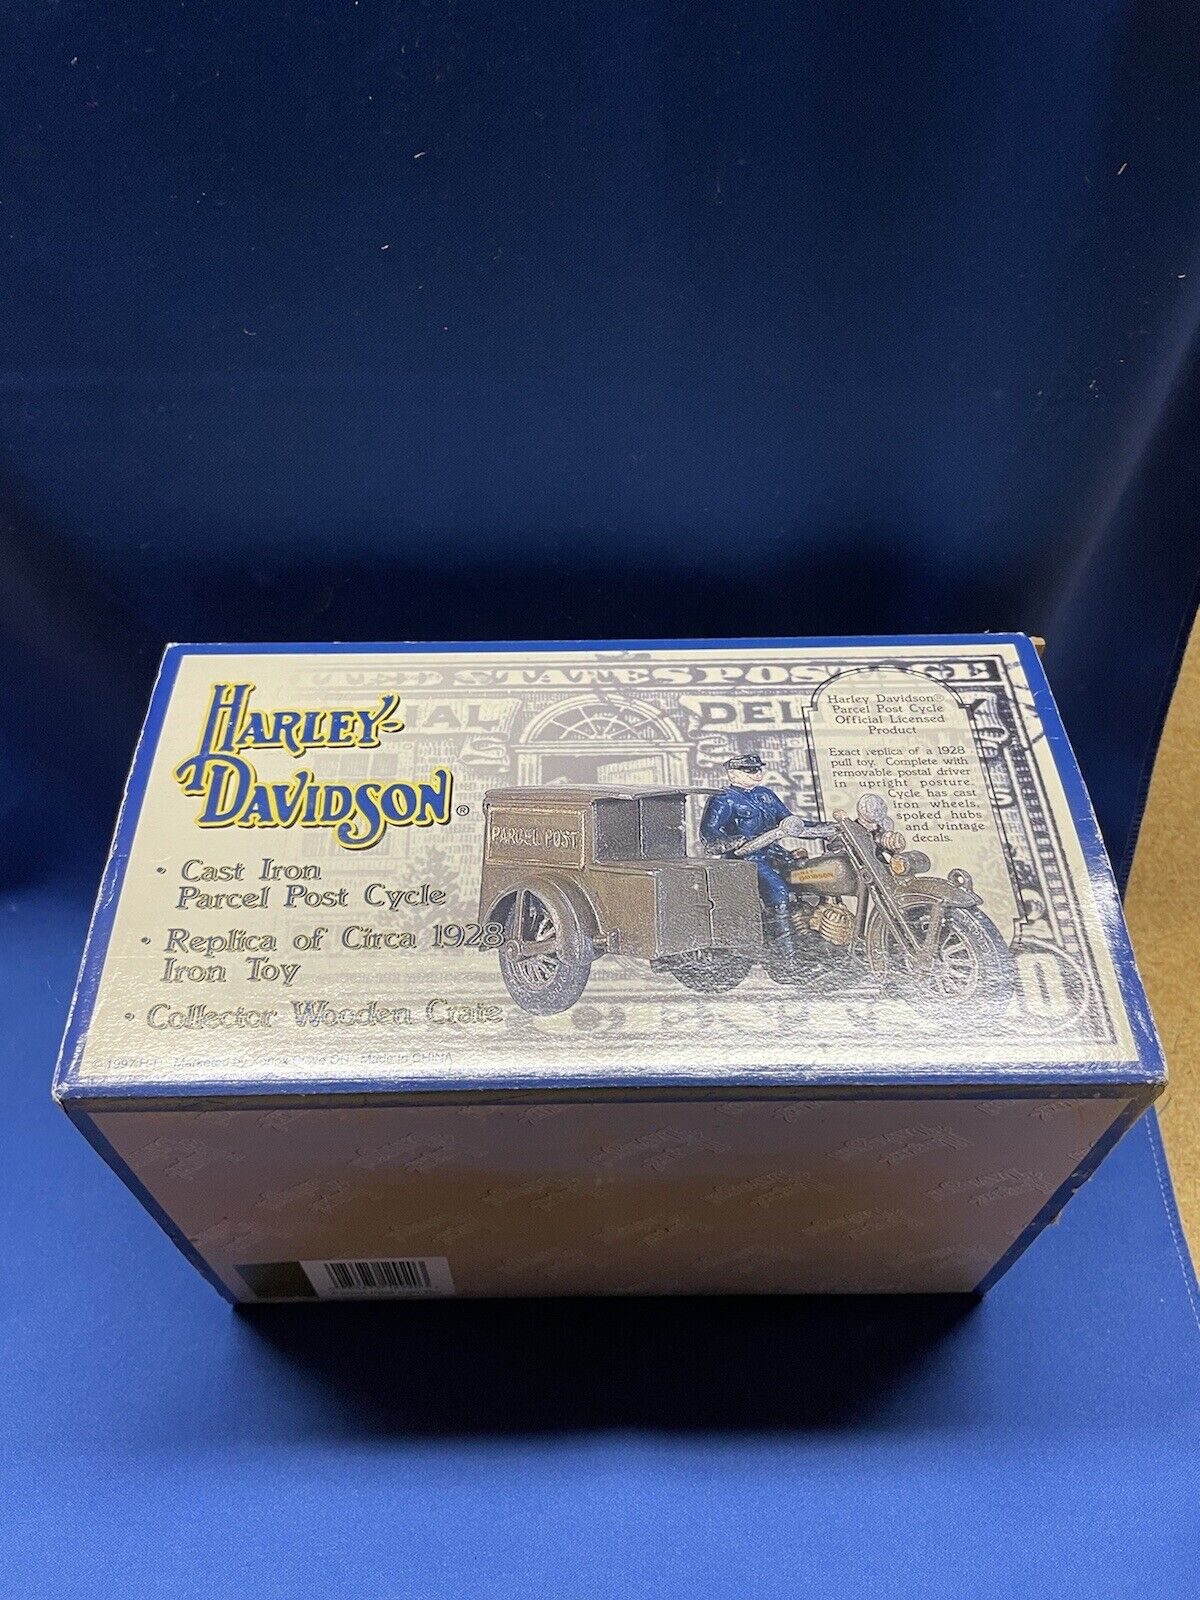 HARLEY DAVIDSON CAST IRON PARCEL POST CYCLE 1928 REPLICA 1997~RARE NEVER OPENED